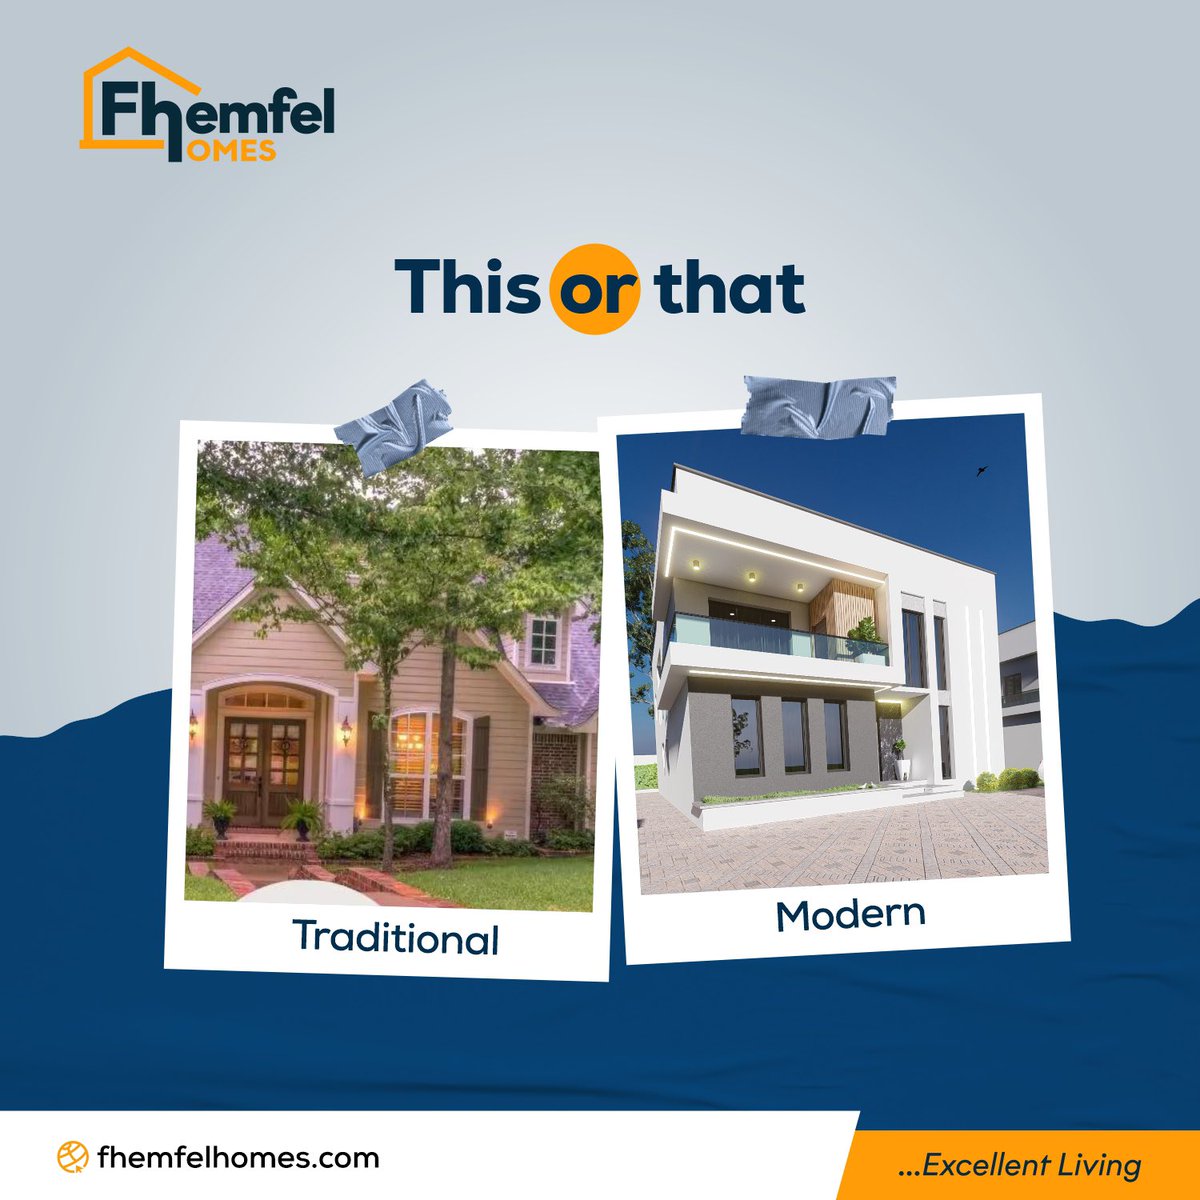 Let’s have some little fun🥳🥳
Which would you rather live in?A Traditional House or a Modern House?

For more enquiries on our services, send us a D.M or contact us:

+234 808 509 9991

#fhemfel #fhemfelhomes #abujarealestate #abuja | Opay | Caramel | Lydia | James Brown | cuppy